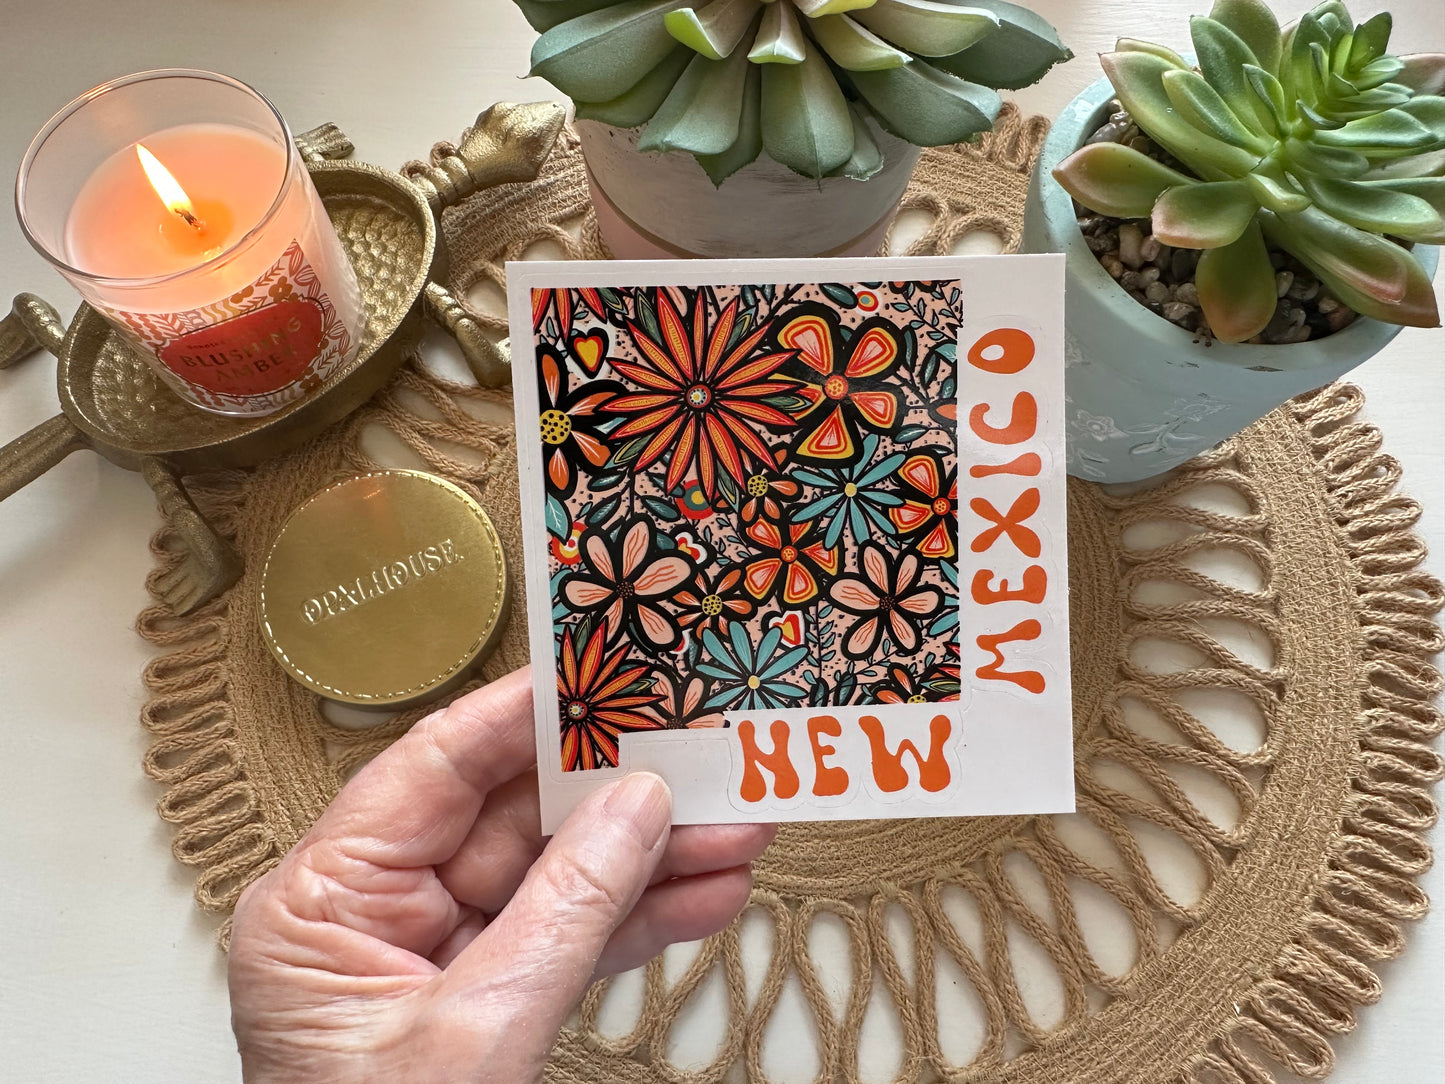 New Mexico State Sticker | Vinyl Artist Designed Illustration Featuring New Mexico State Outline Filled With Retro Flowers with Retro Hand-Lettering Die-Cut Stickers